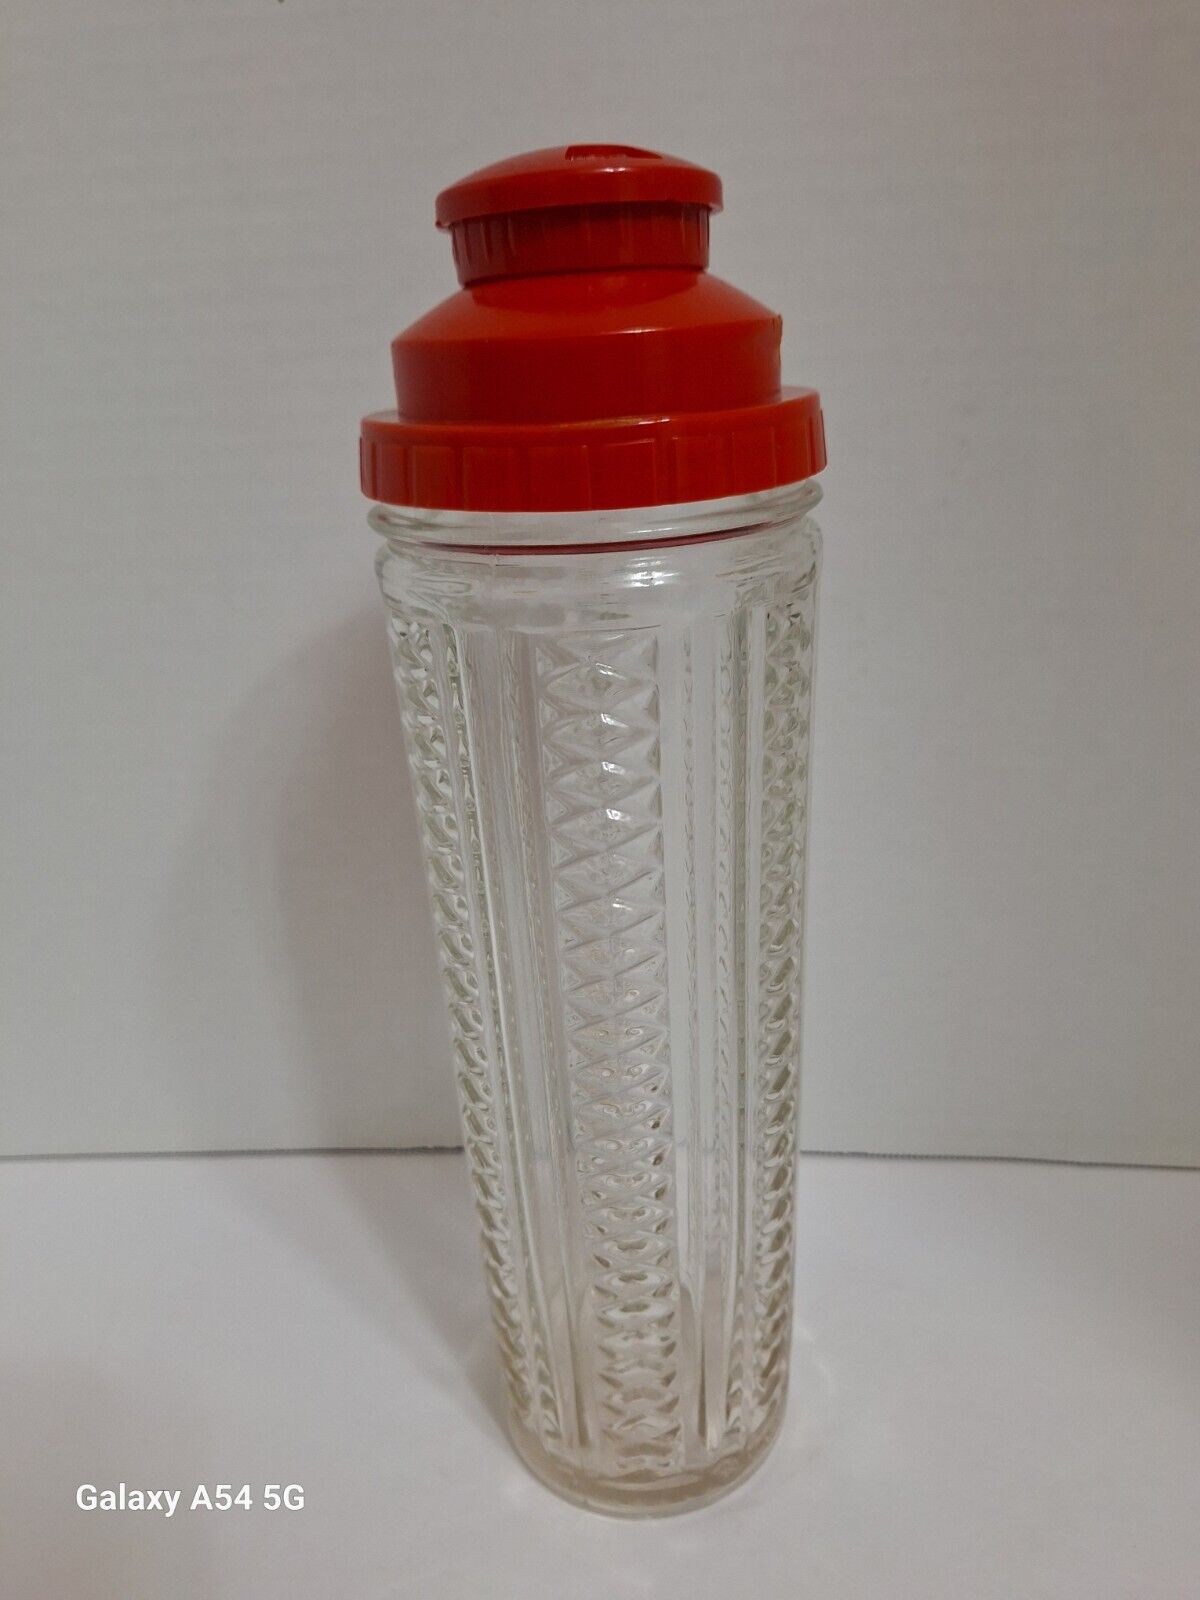 Vintage Medco 550 NYC Dial-A-Drink Skyscraper Cocktail Shaker Red Strainer  Read